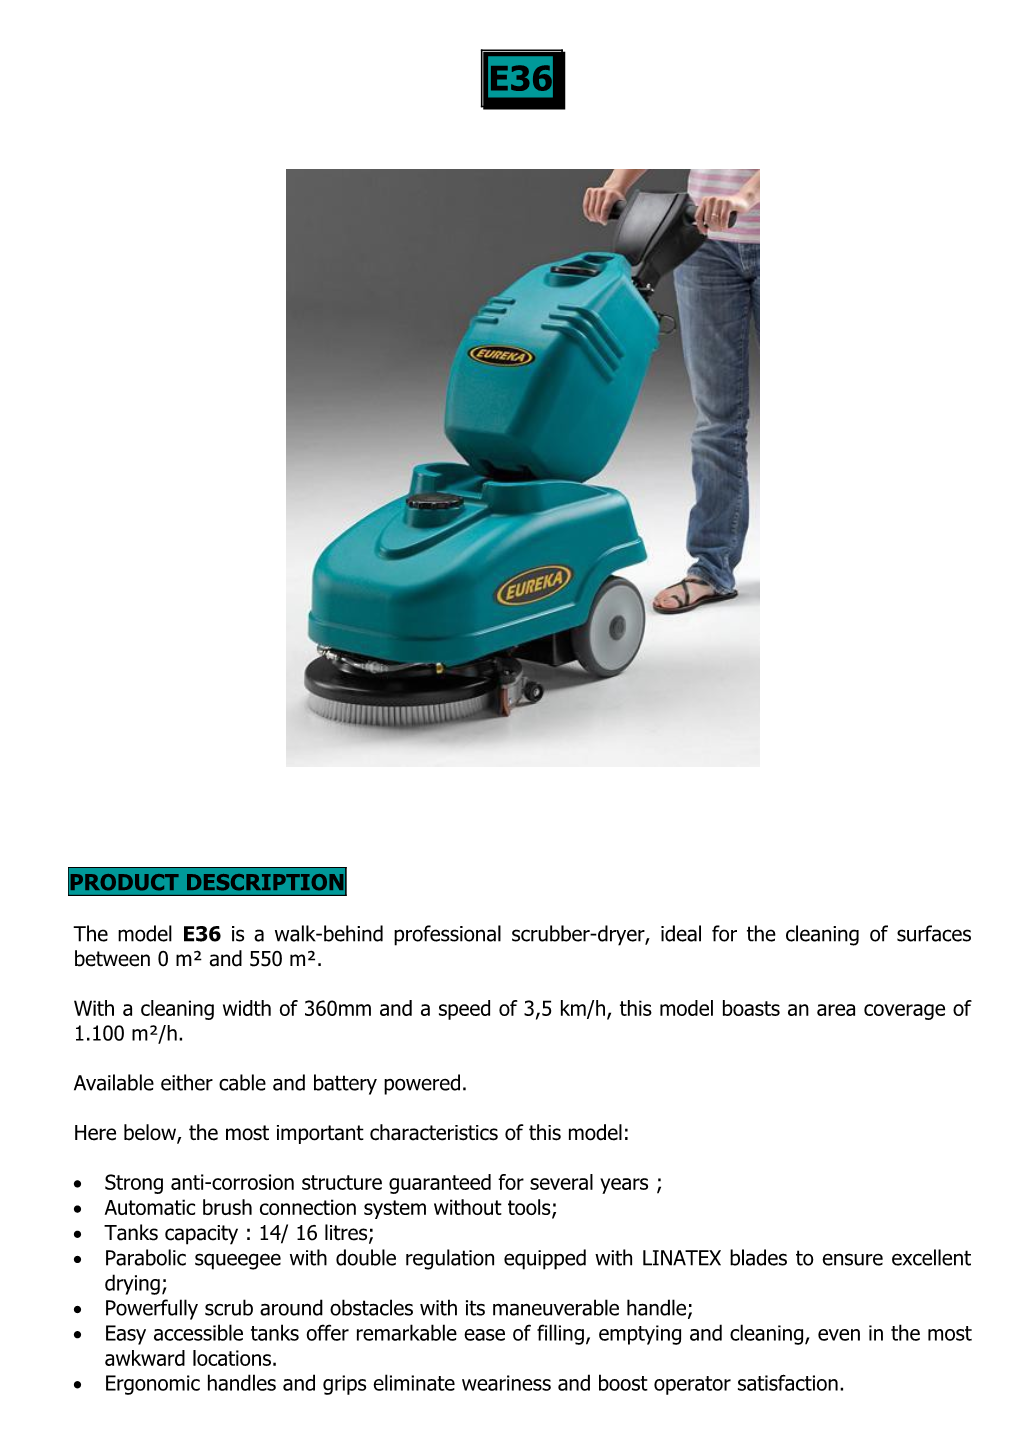 With a Cleaning Width Of360mm and a Speed Of3,5 Km/H, This Model Boasts an Area Coverage